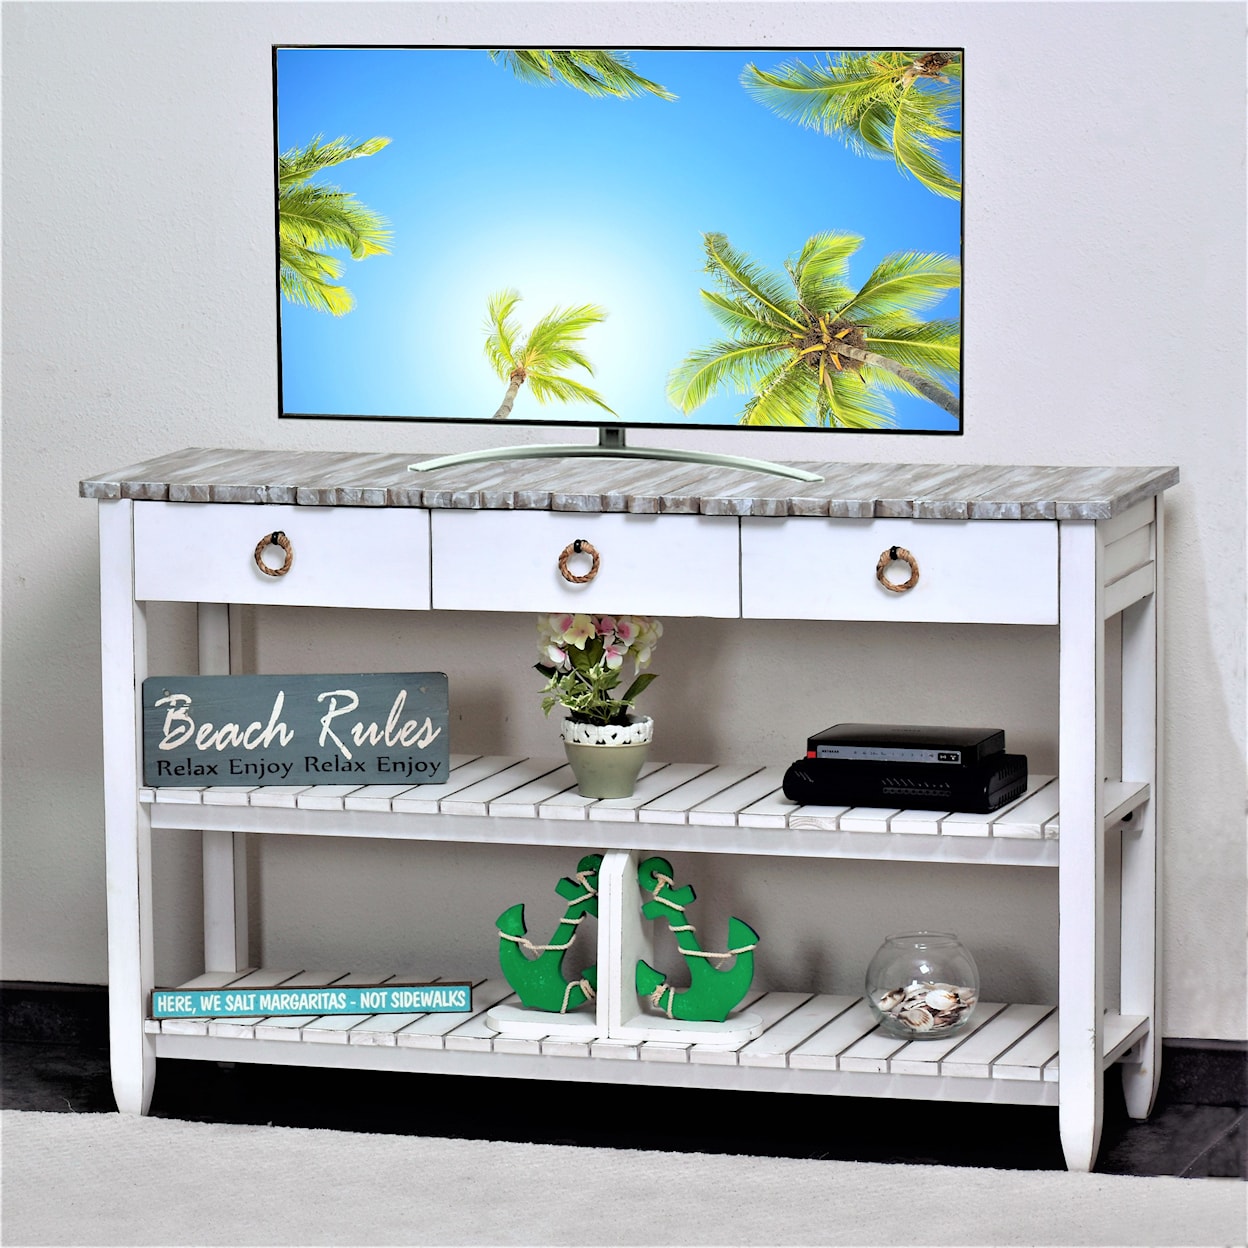 Sea Winds Trading Company Picket Fence Occasional Entertainment Center